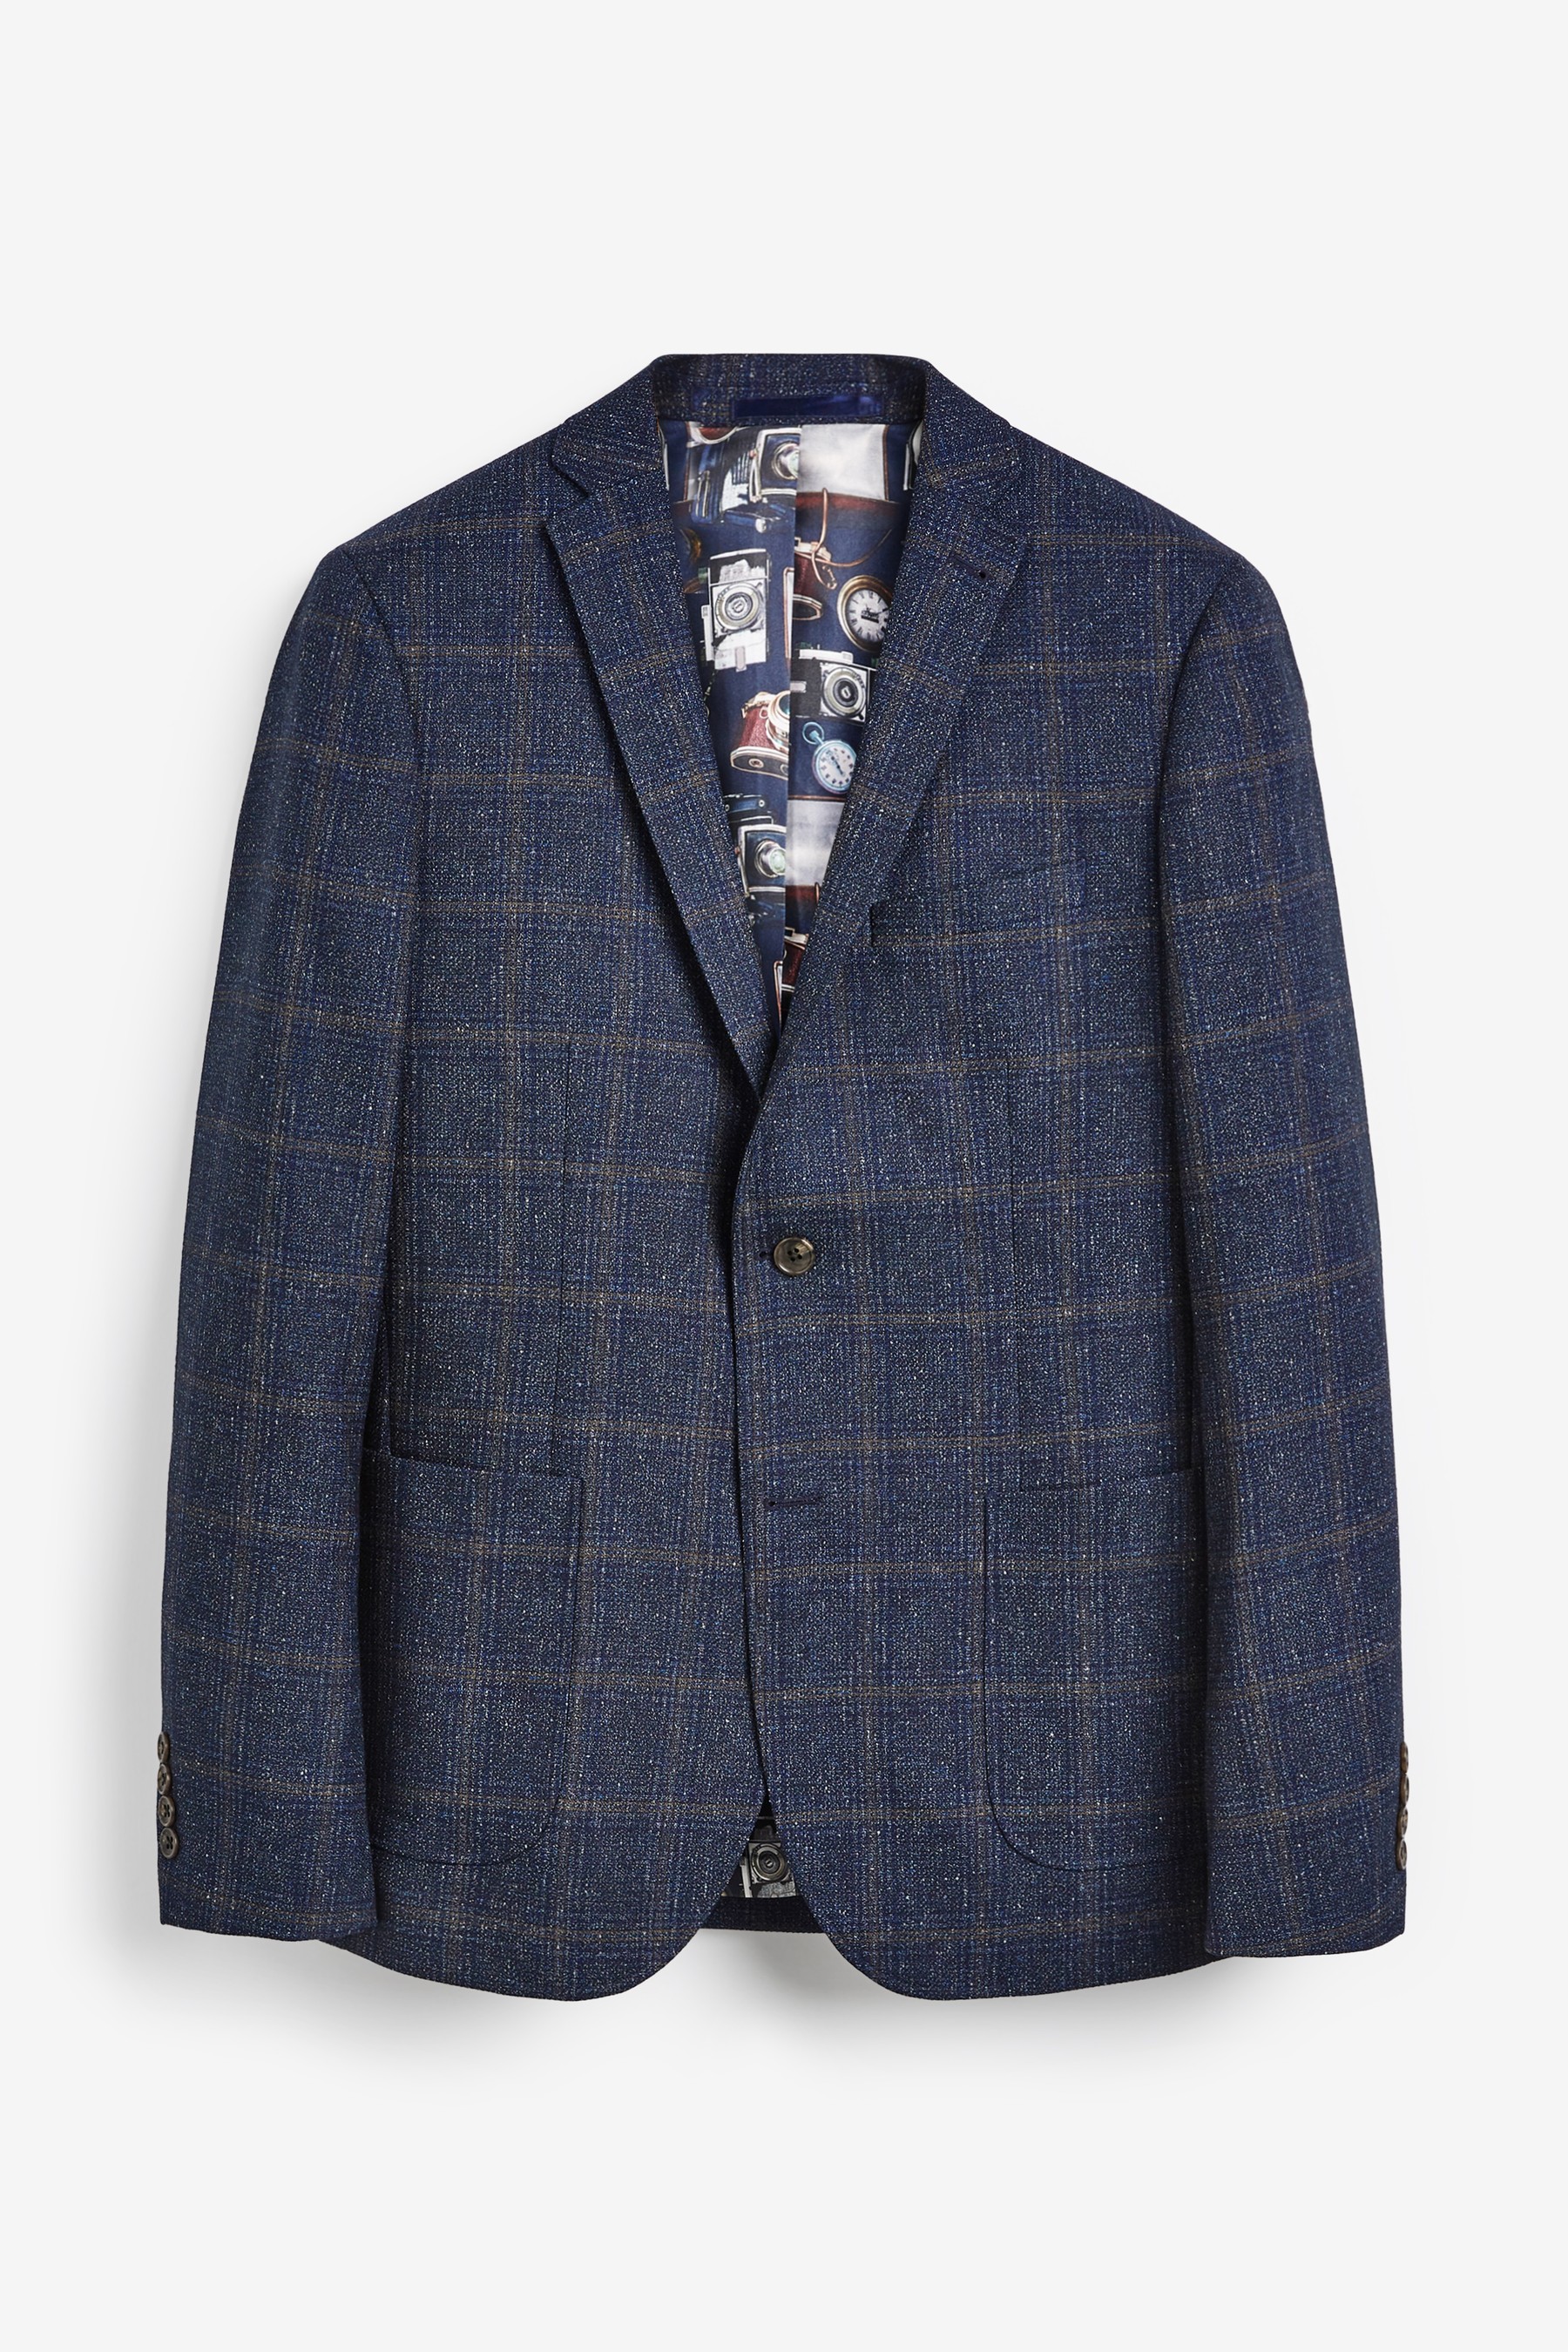 Buy Check Blazer from the Next UK online shop